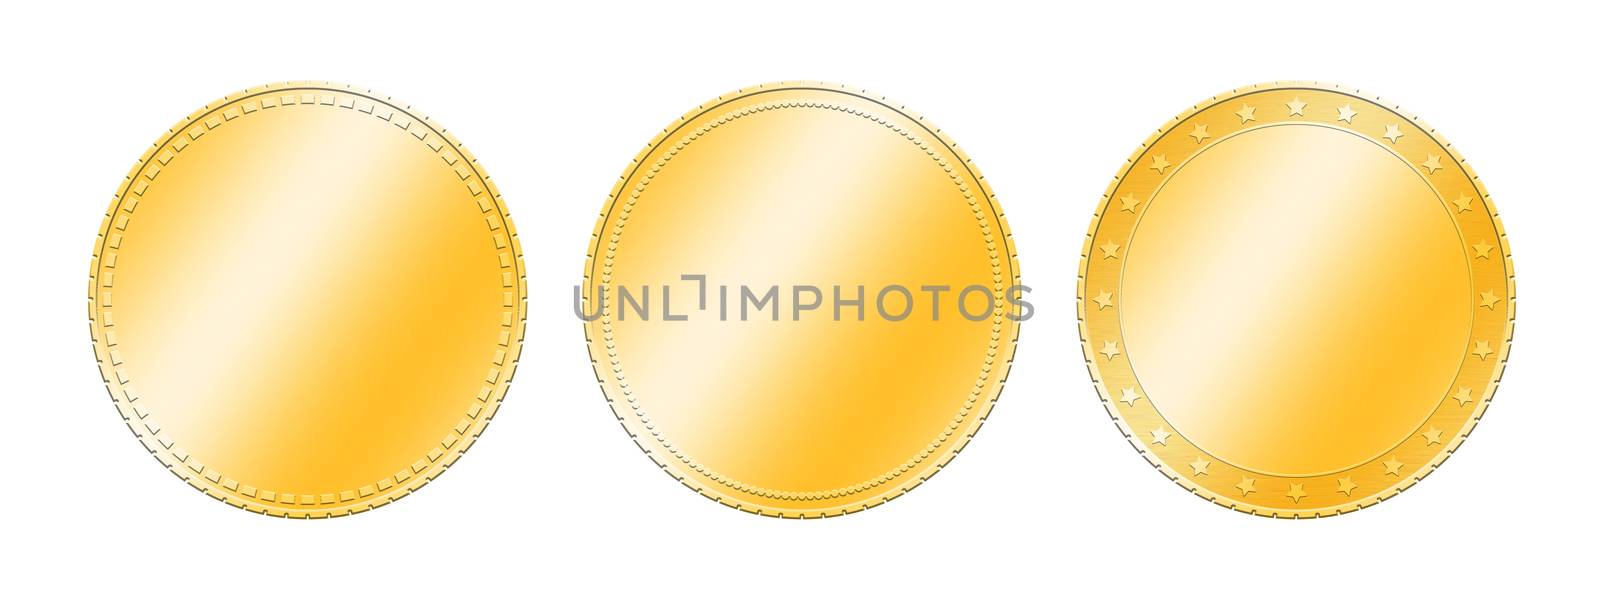 Close up three different golden metal blank coins template or award achievement badges isolated on white background